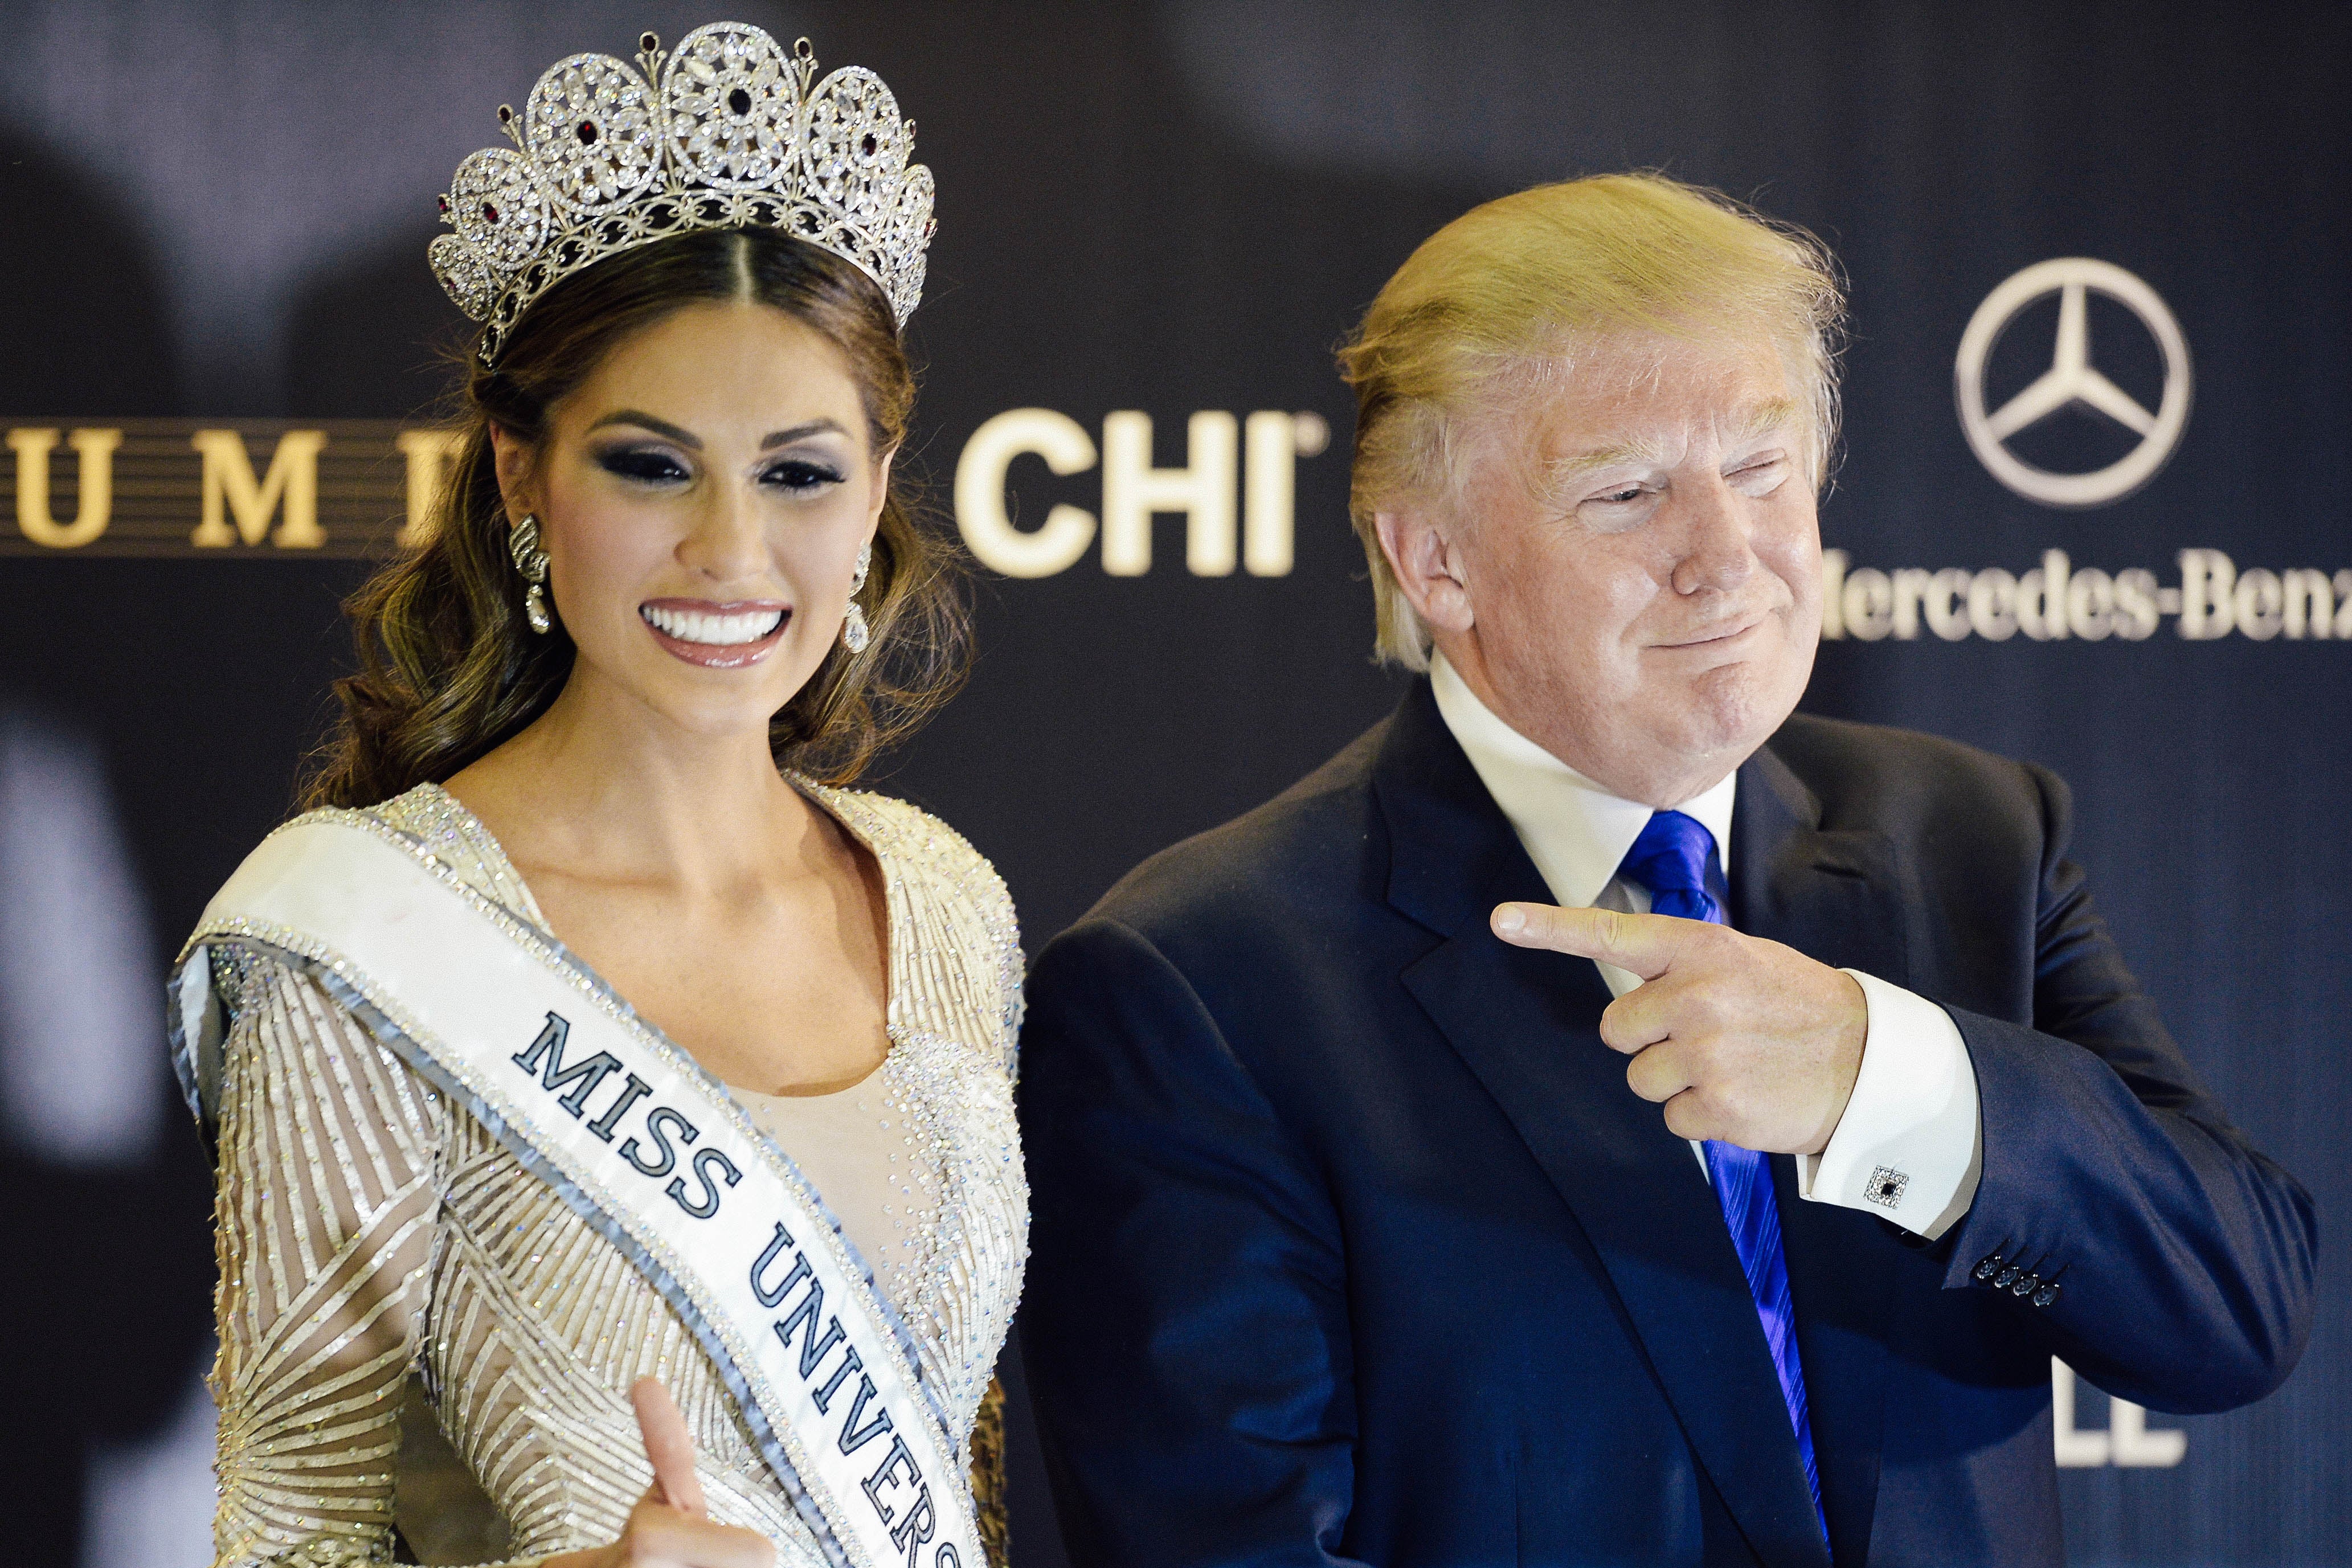 Miss Universe 2013 Gabriela Isler of Venezuela and Donald Trump on Nov. 9, 2013. Trump is wearing a blue or indigo tie in the photo.